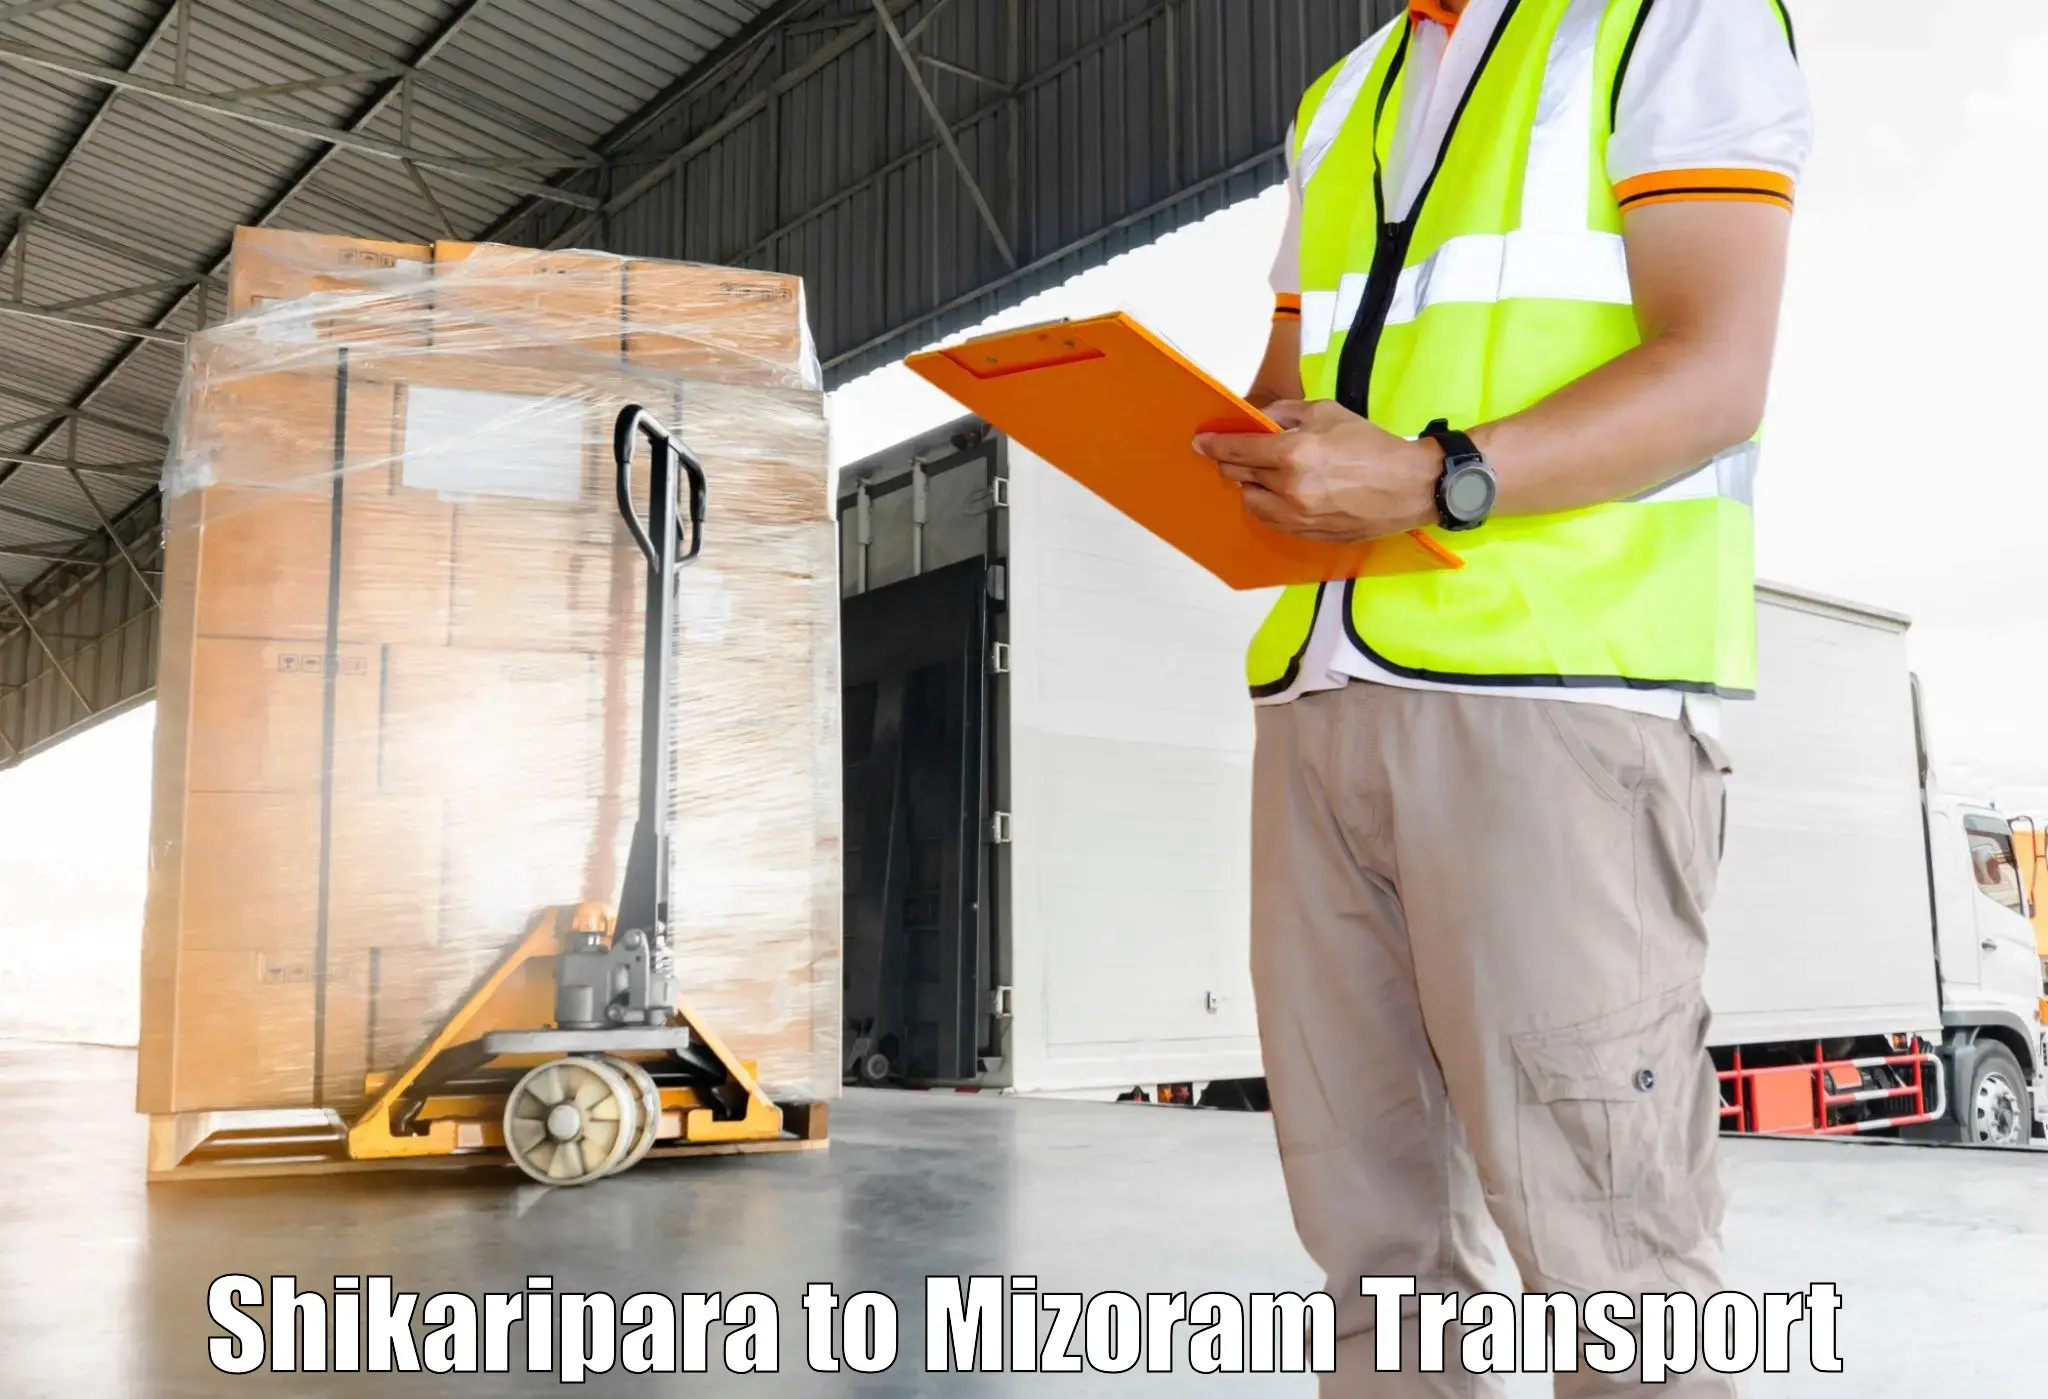 Transport shared services in Shikaripara to Darlawn